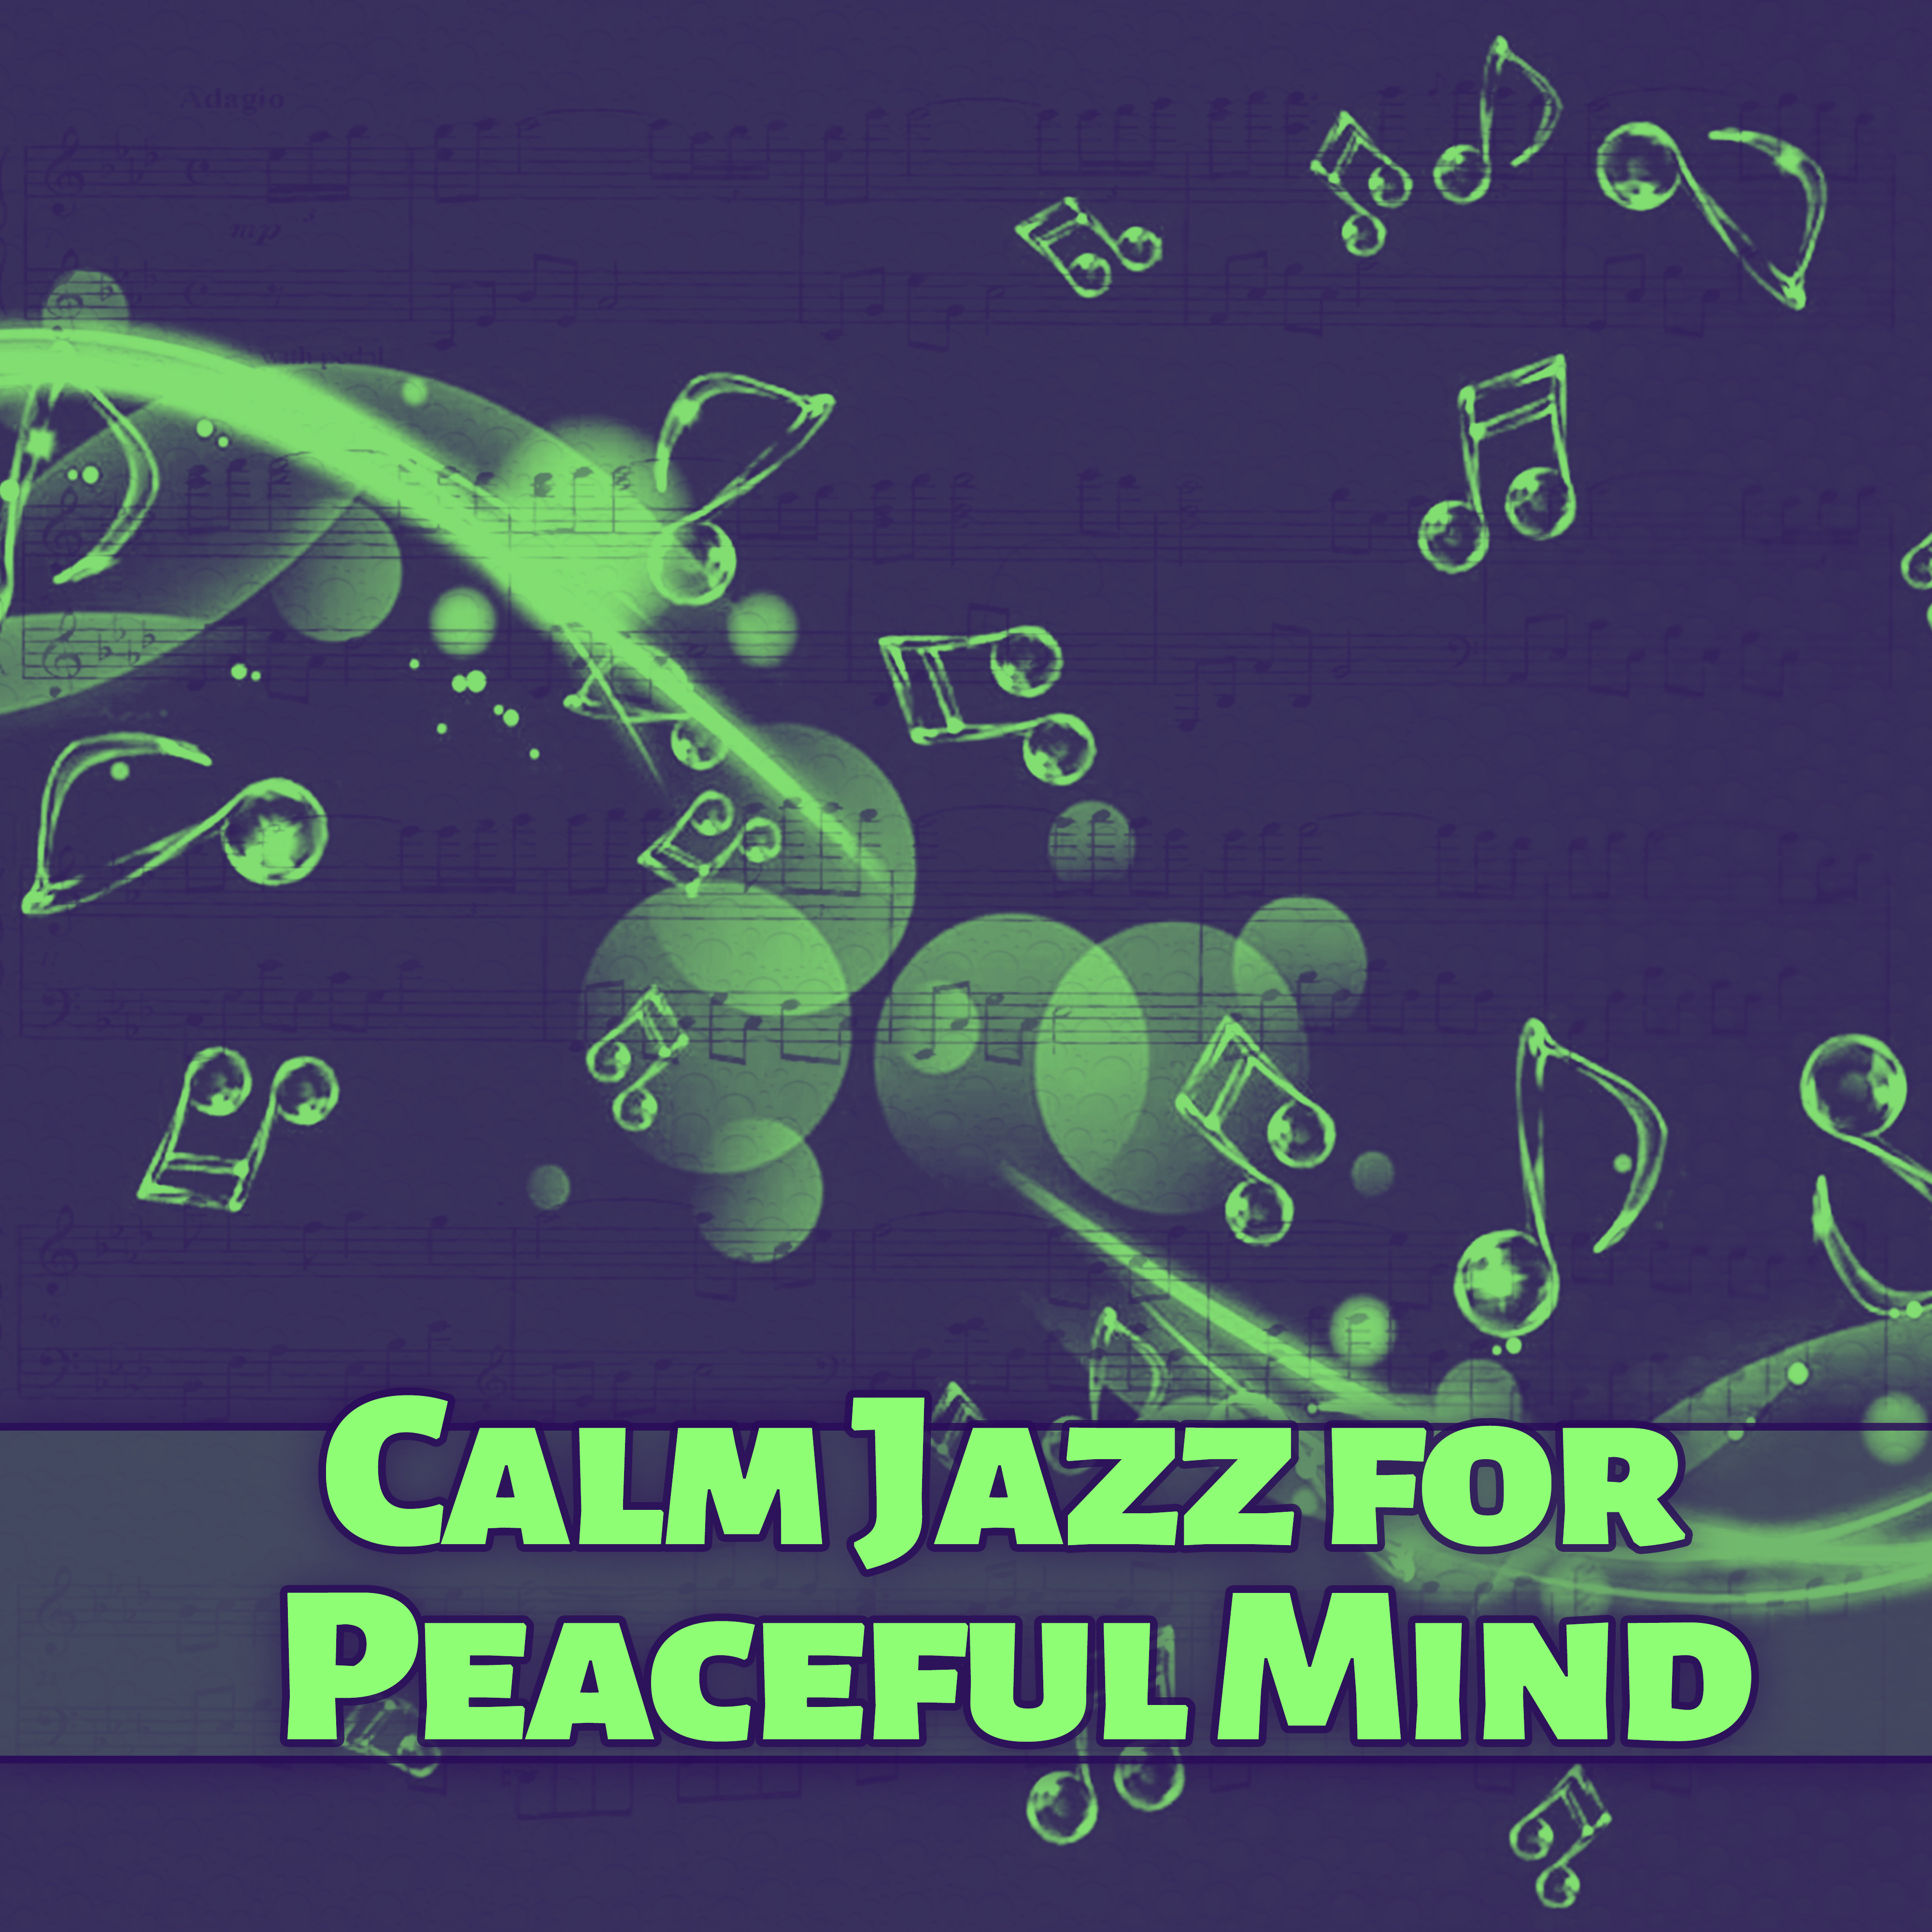 Calm Jazz for Peaceful Mind – Learn Faster with Jazz Music, Smooth Jazz for Better Concentration, Chill Yourself